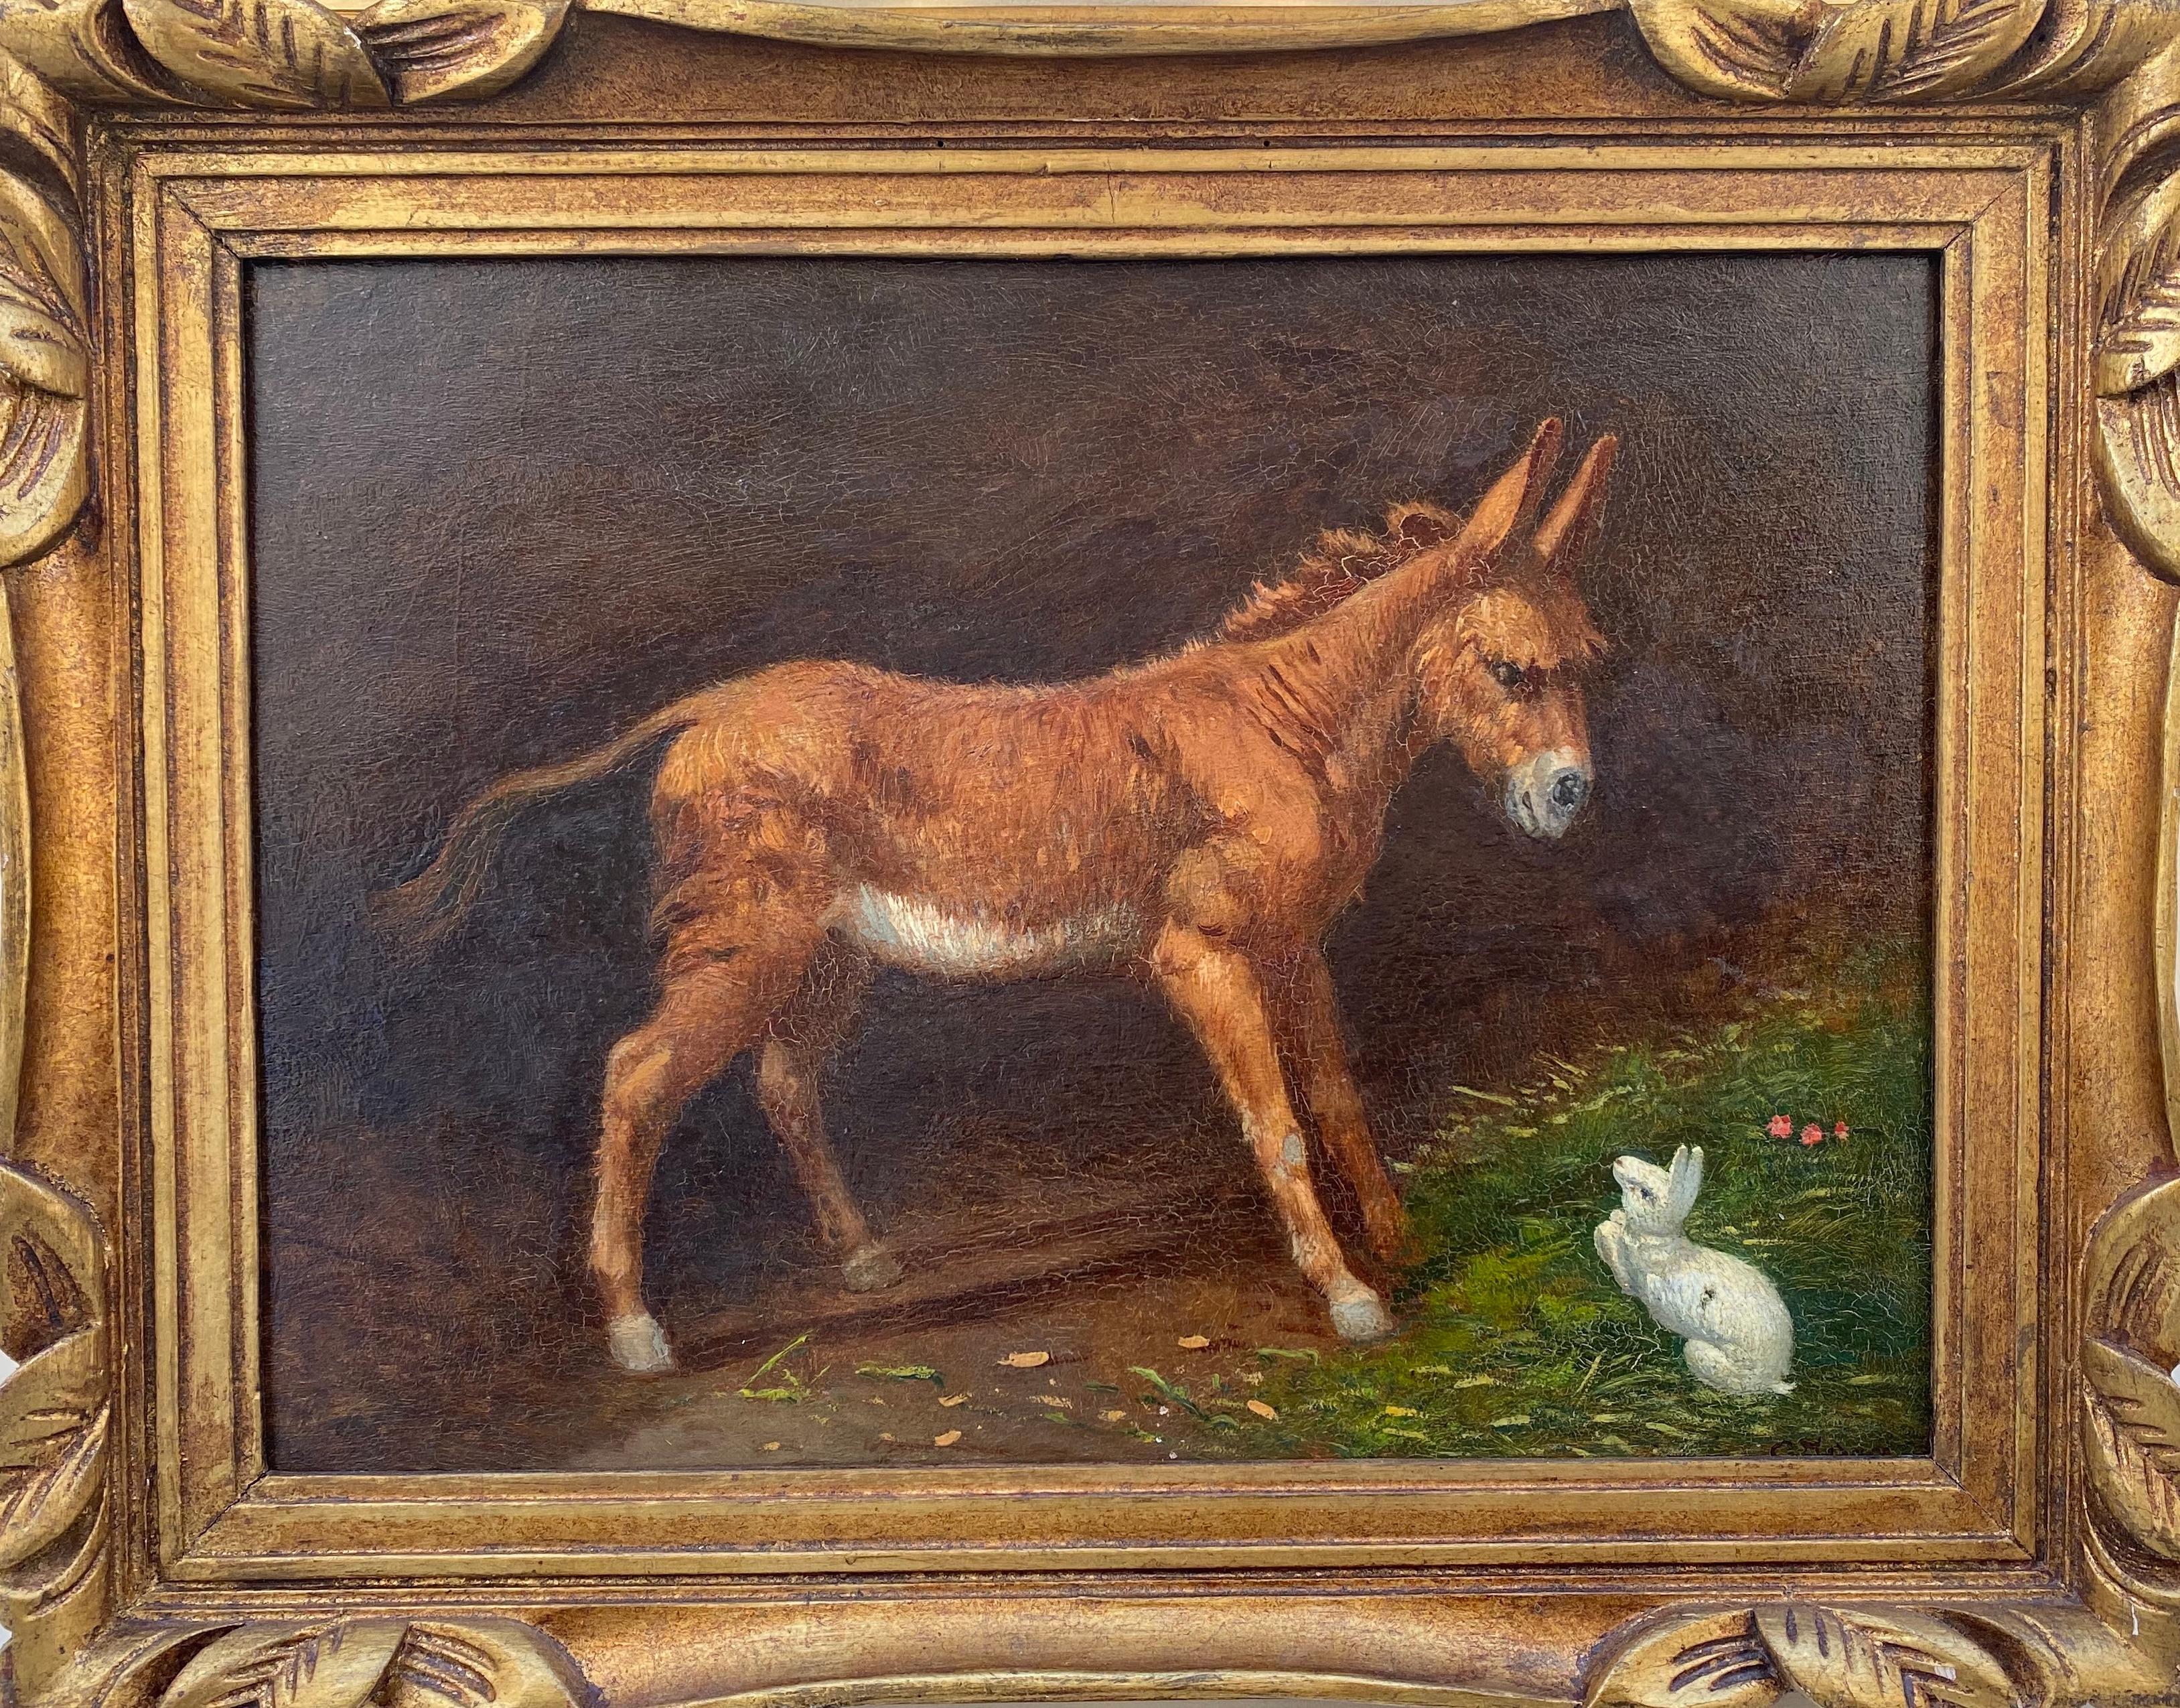 Little Mule and white rabbit: 1890s novecento animal equestrian horse painting